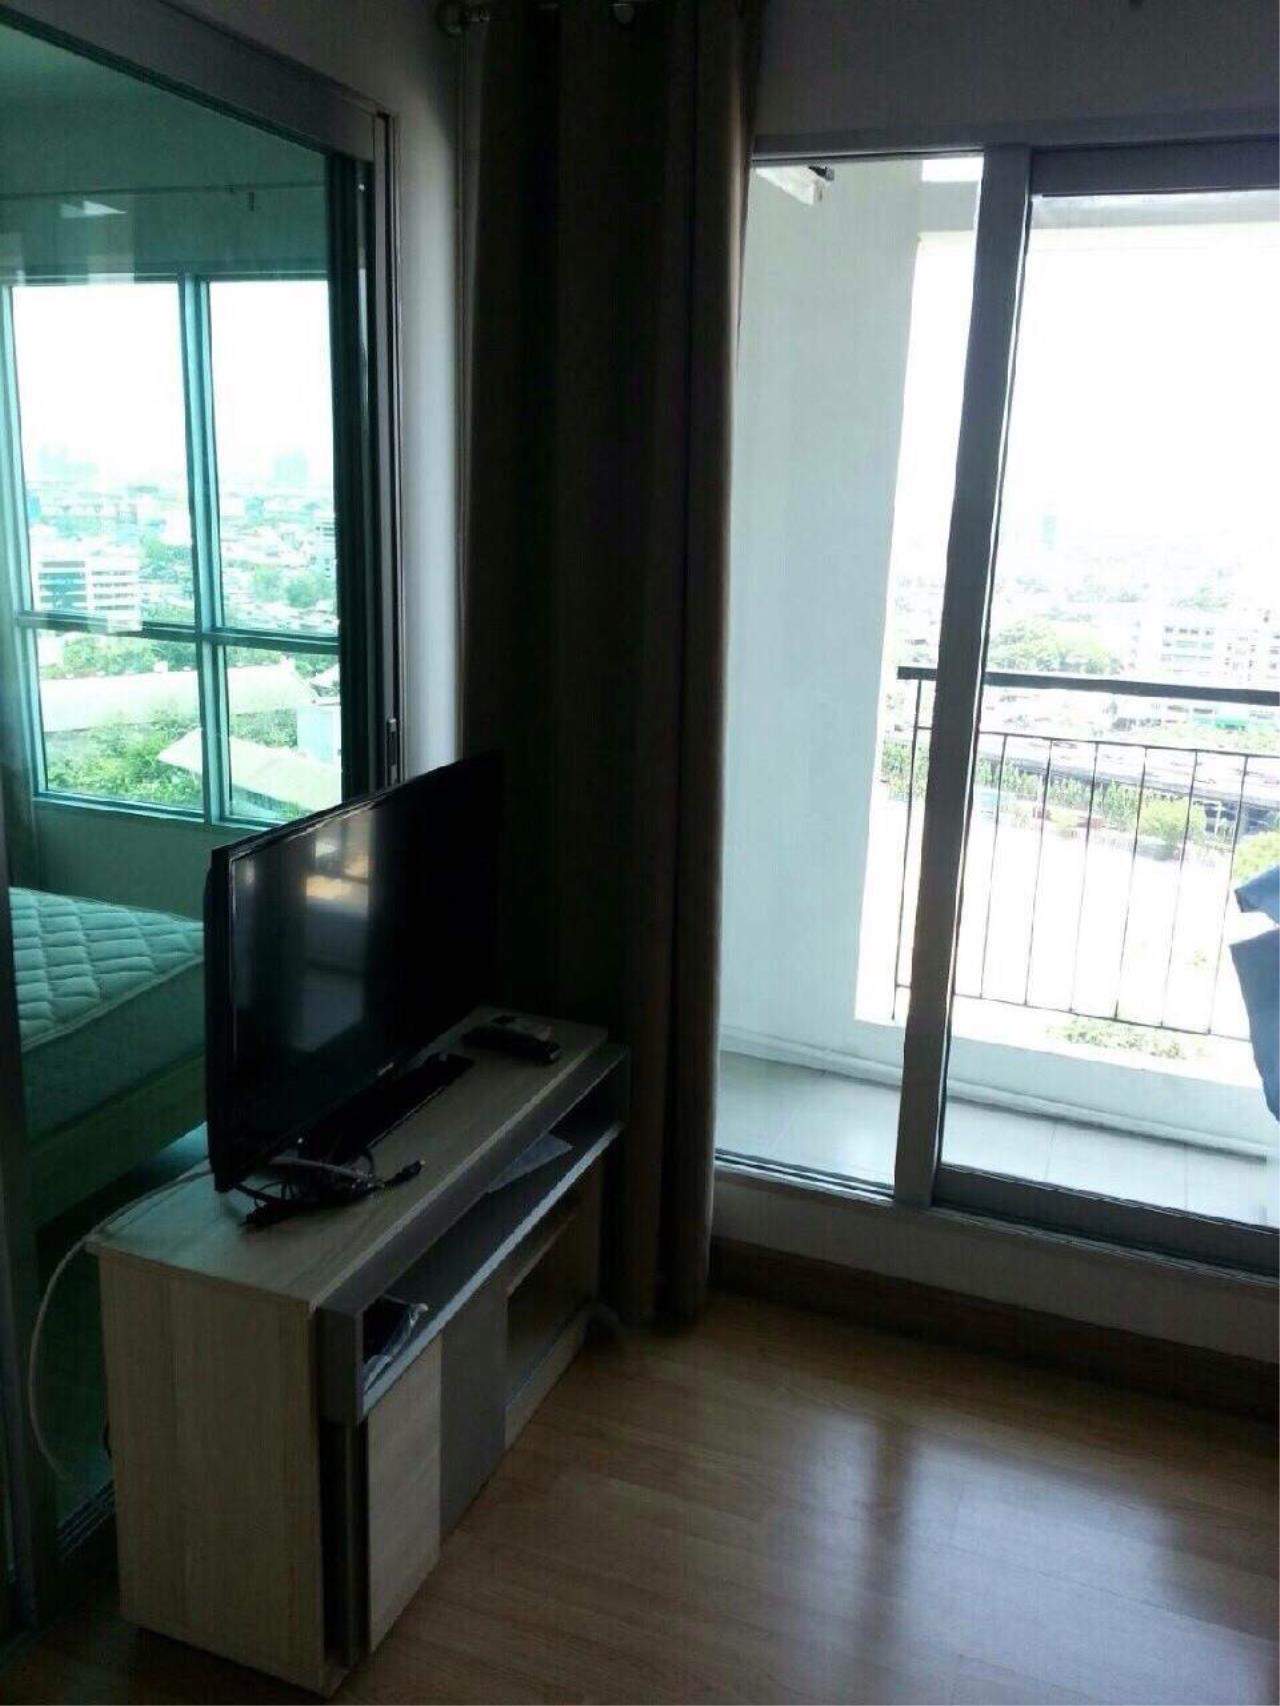 RE/MAX All Star Realty Agency's Aspire Rama4 Ekamai for sale/rent one bed 4